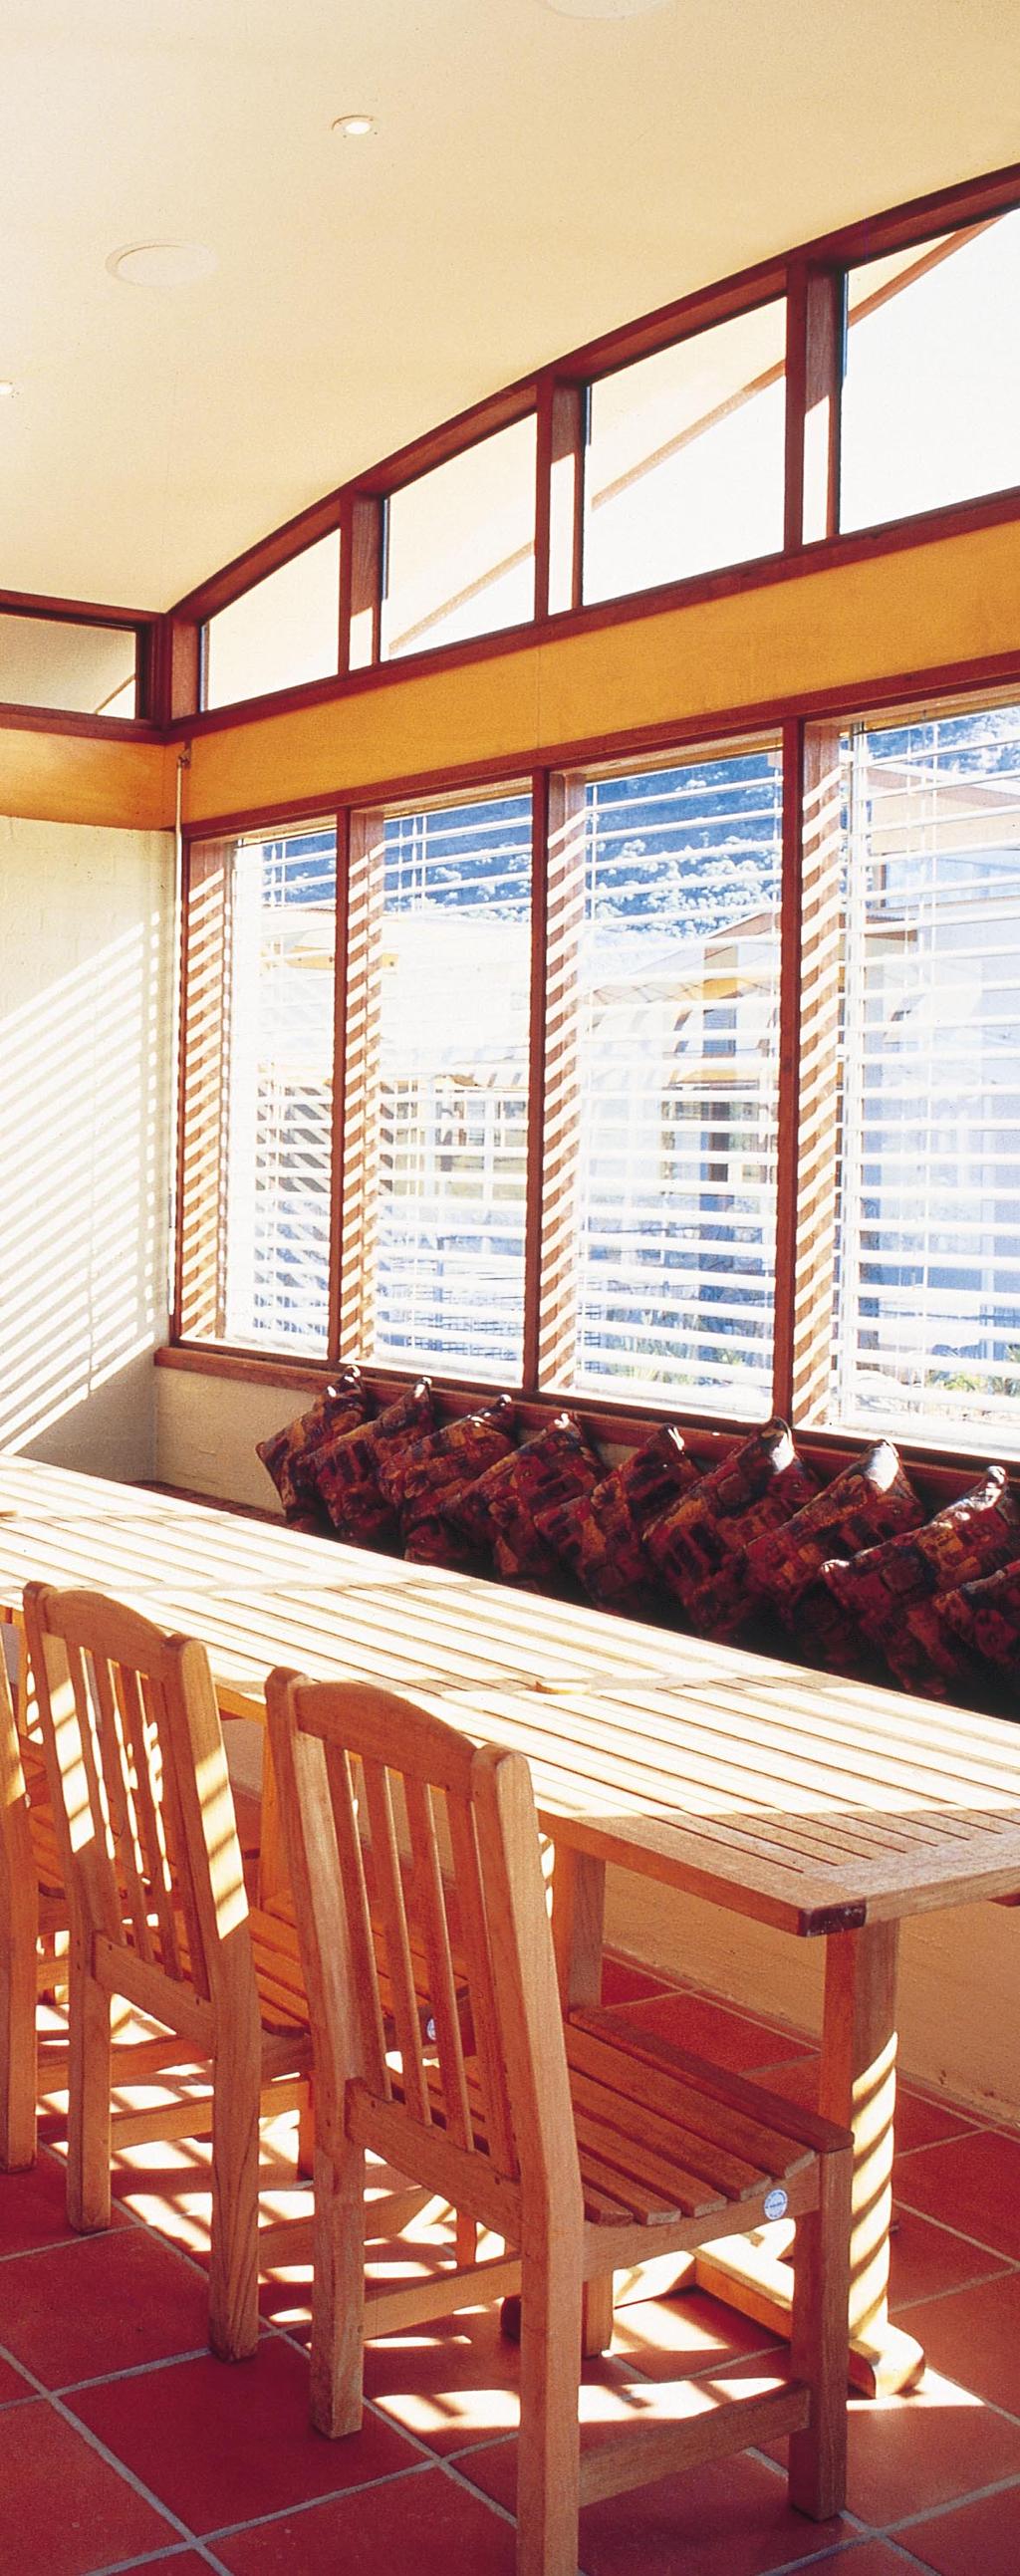 Glare Protection and Daylight Control Vental external blinds reduce the transmission of solar radiation into the building and provide diffused and more uniform daylight.